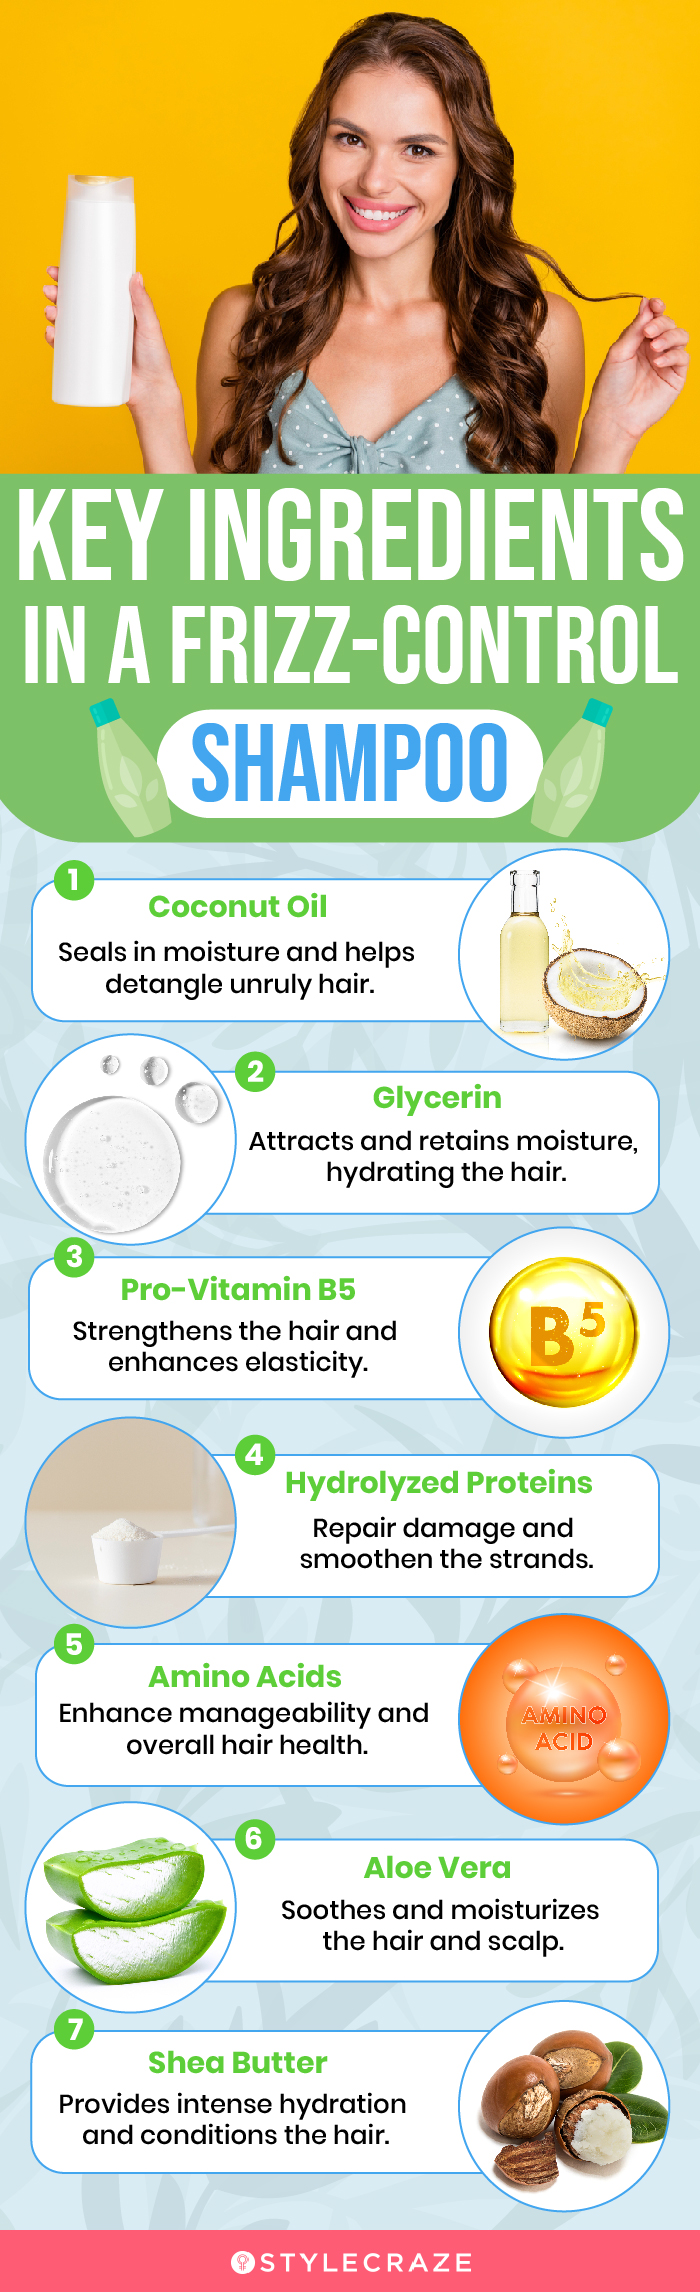 Key Ingredients In A Frizz-Control Shampoo (infographic)